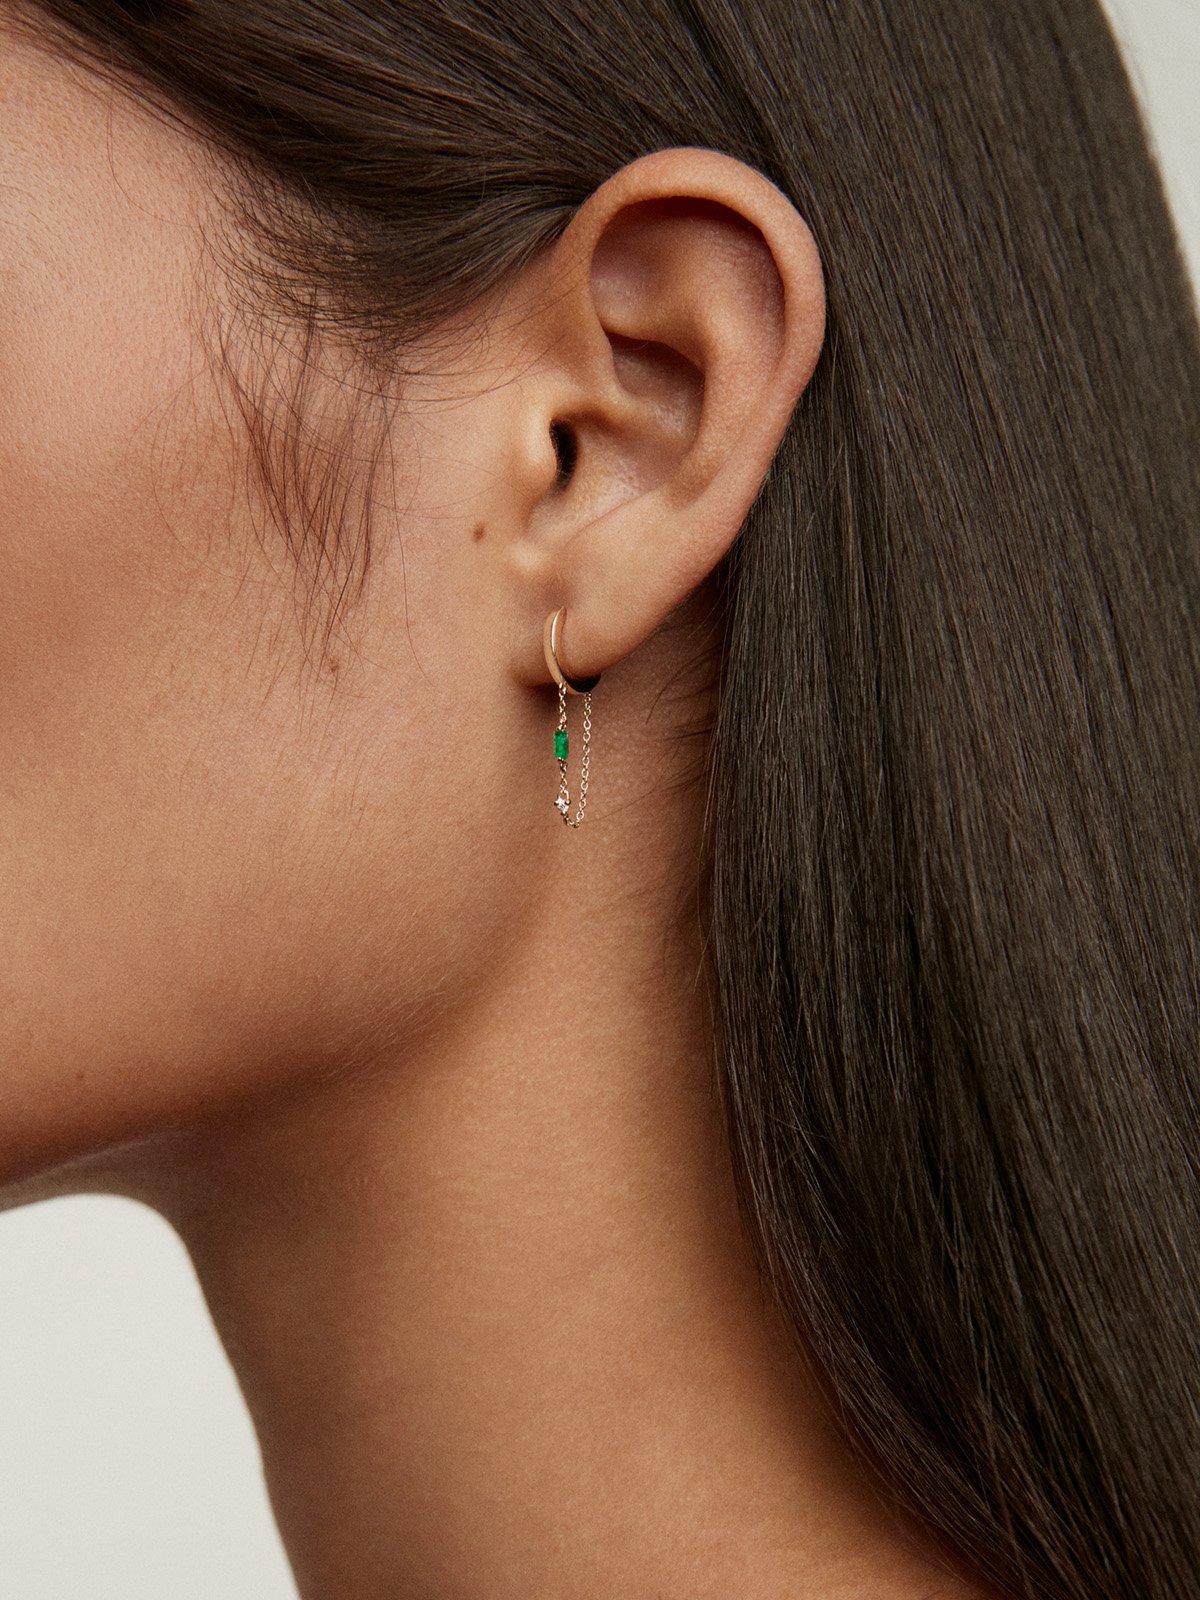 Single 9K yellow gold hoop earring with chain, emerald and diamond.